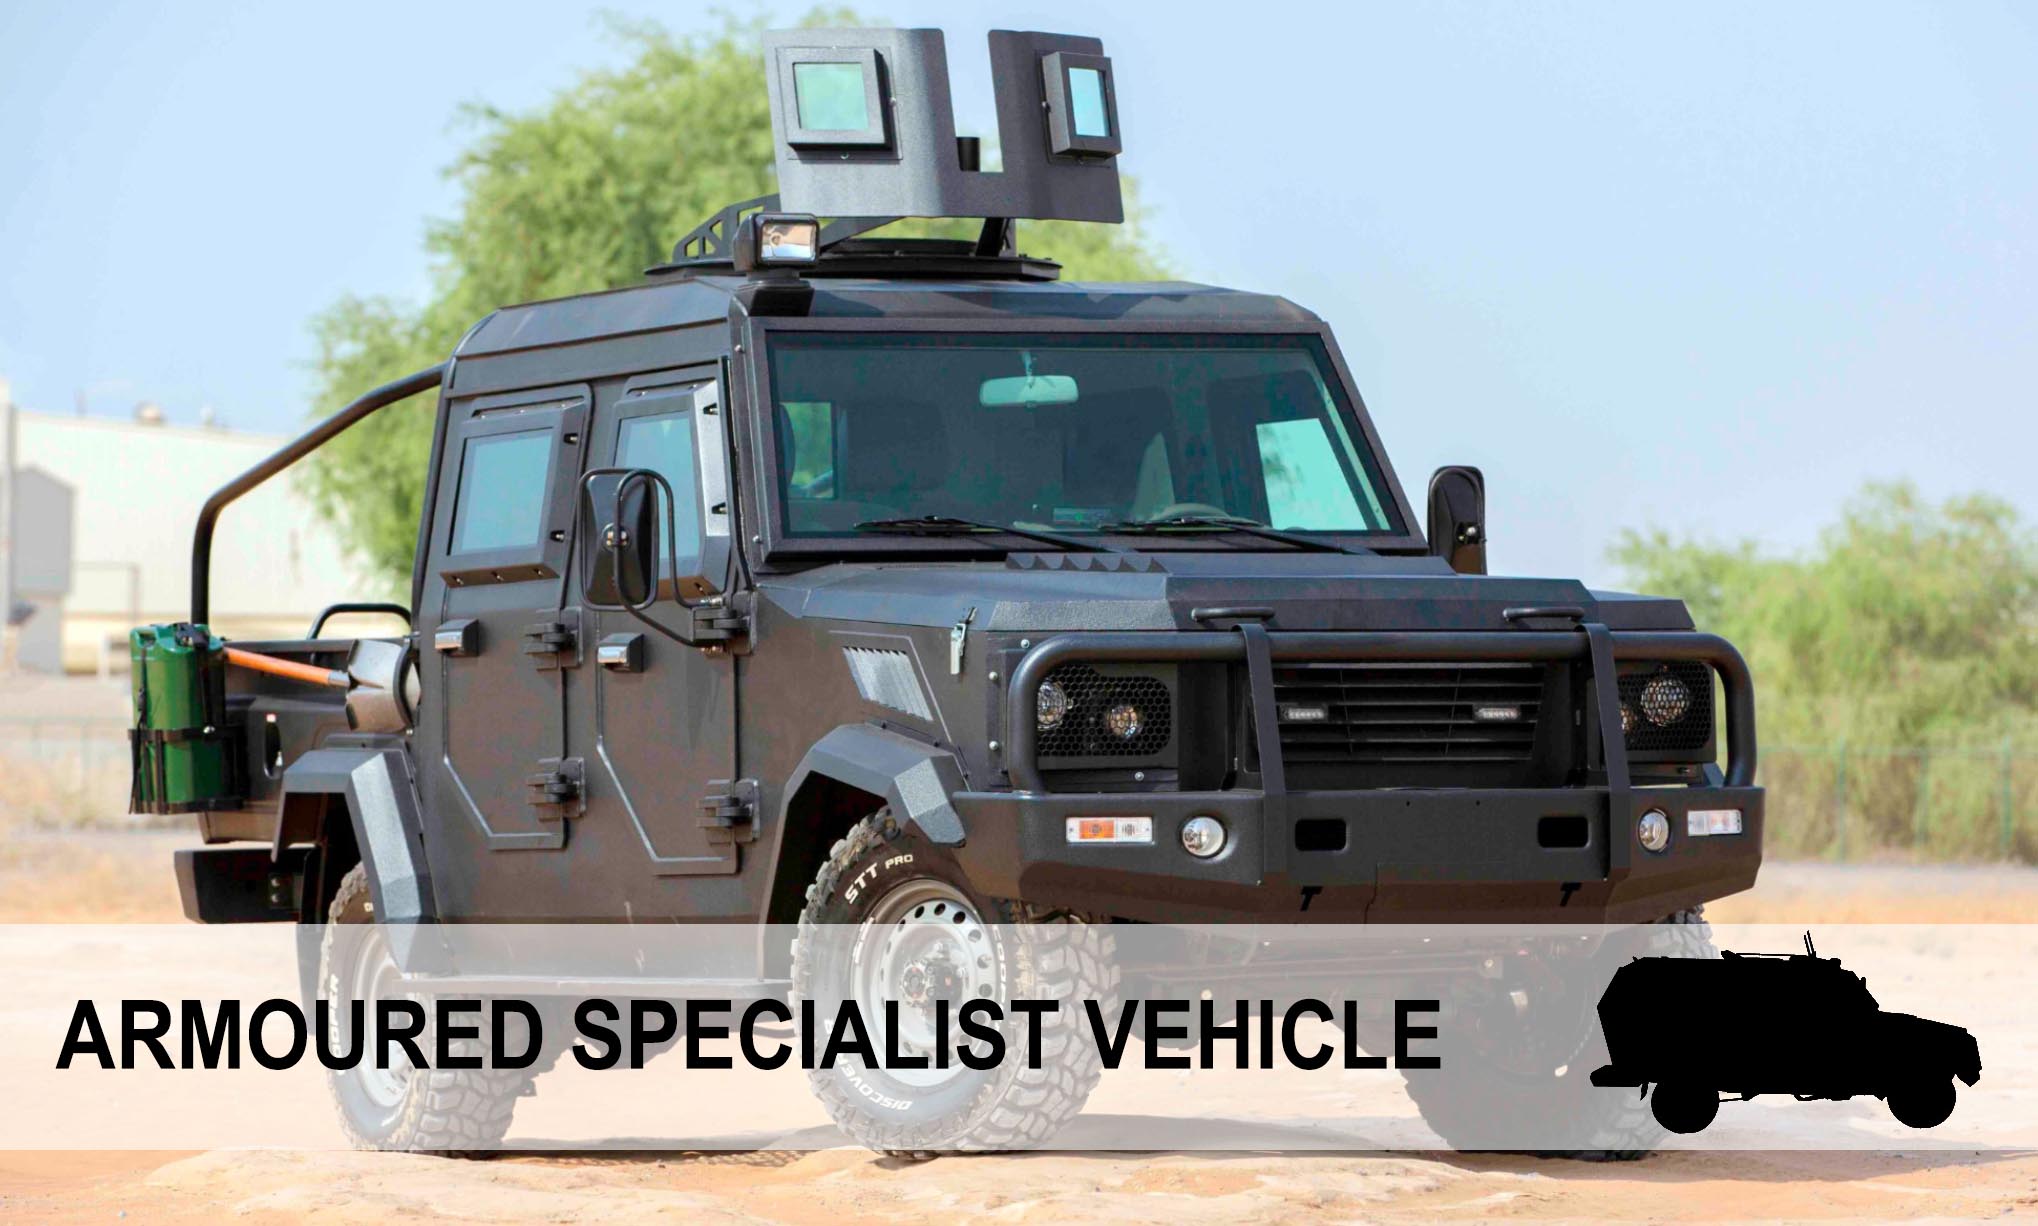 The Armoured Specialist Vehicle